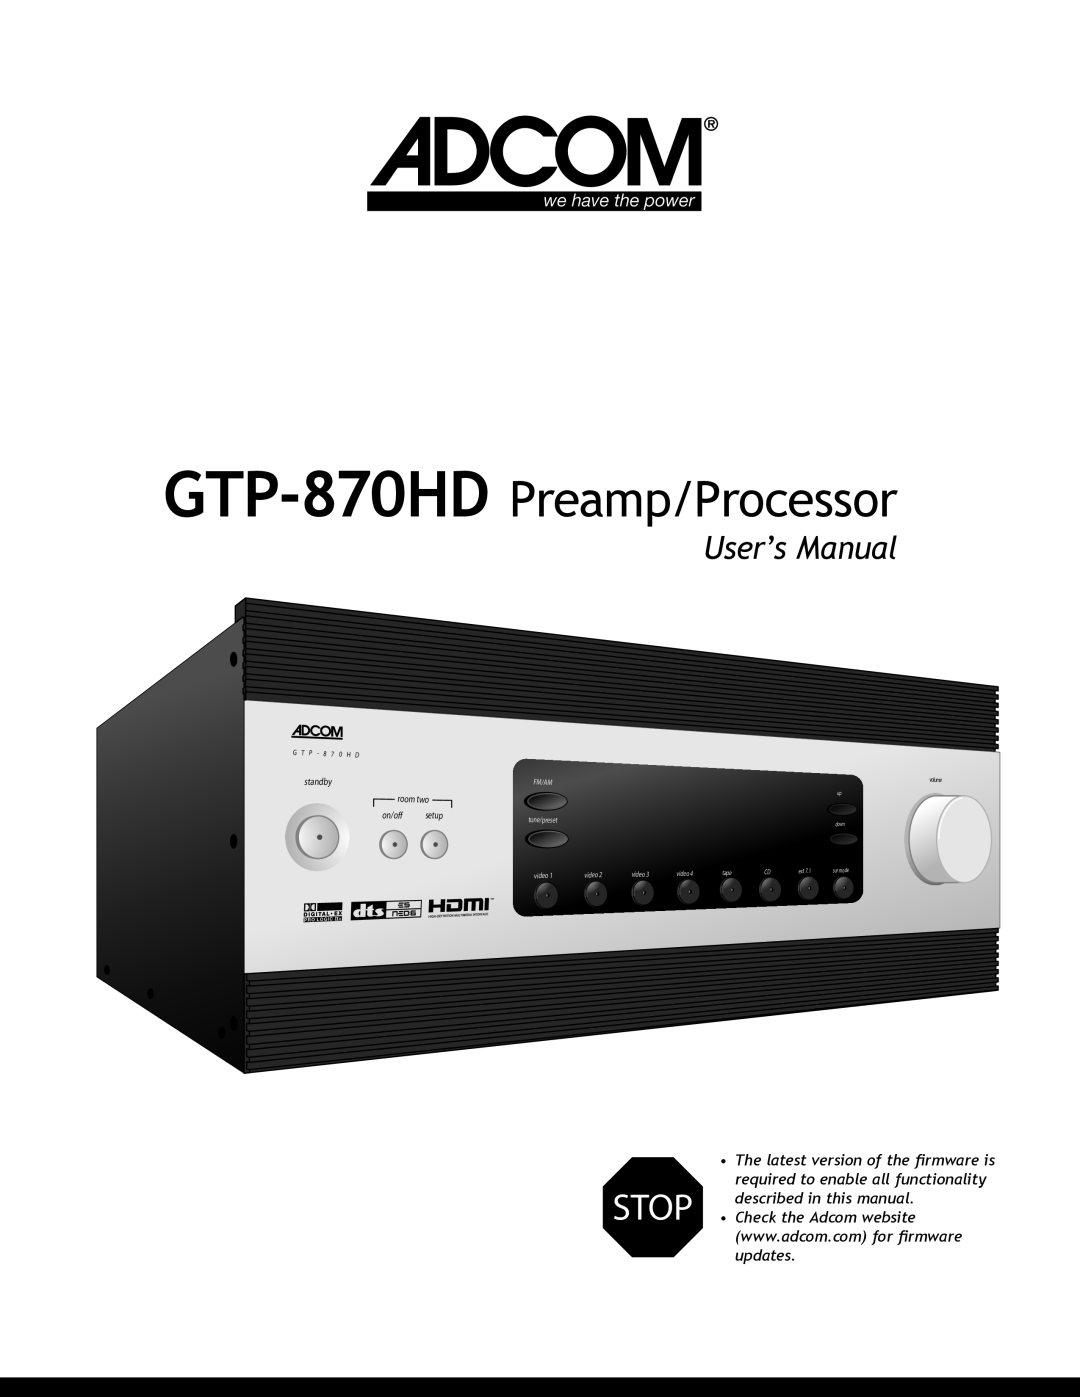 Adcom user manual GTP-870HD Preamp/Processor, Stop, User’s Manual, • The latest version of the ﬁrmware is, room two 